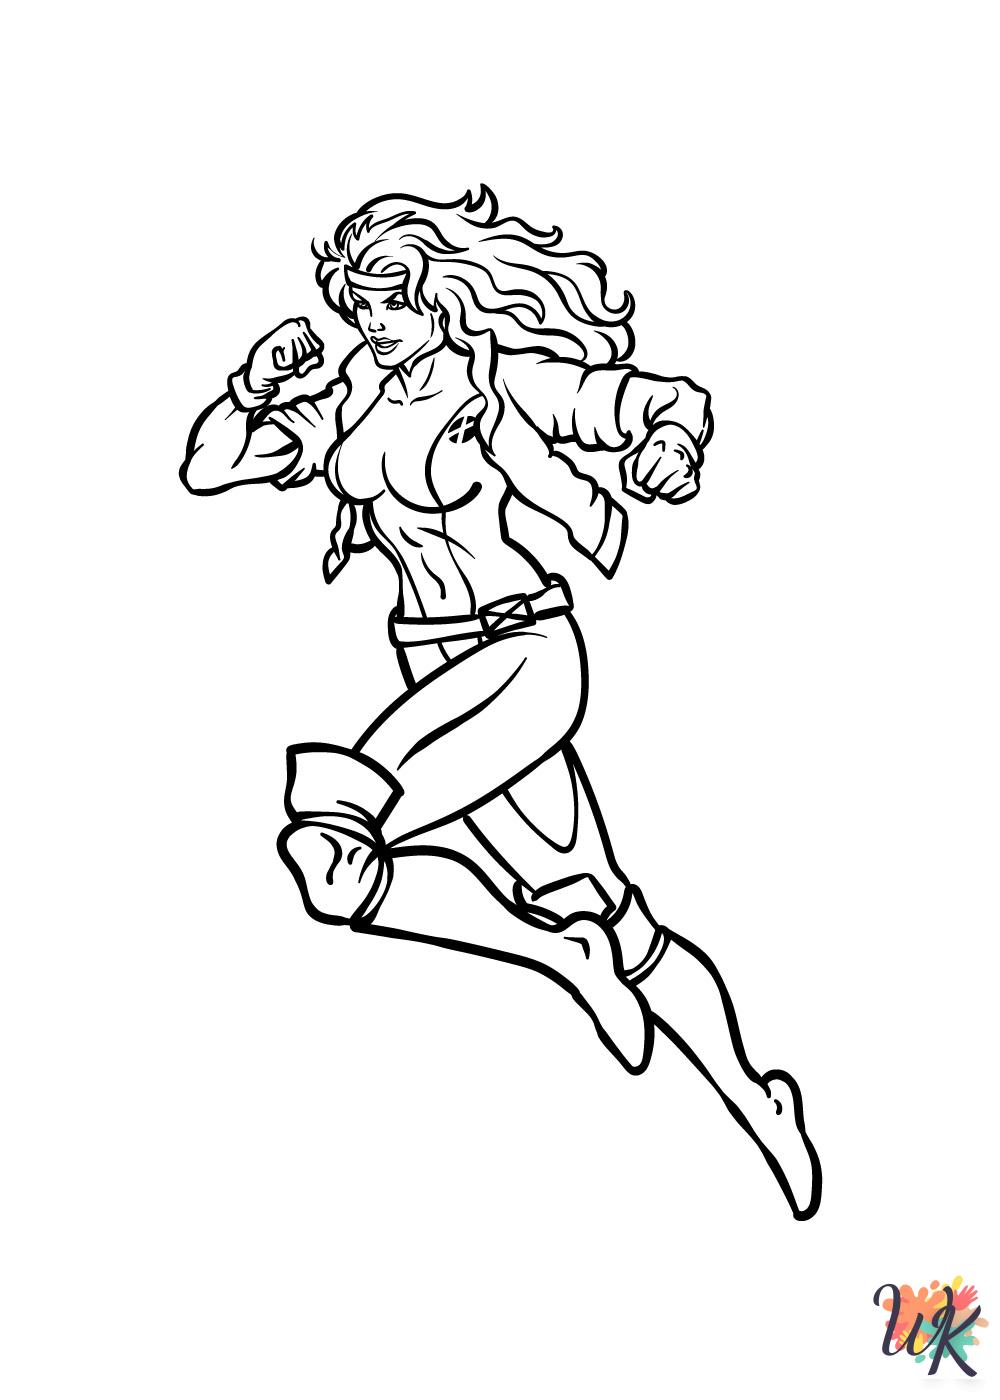 Superhero coloring pages to print